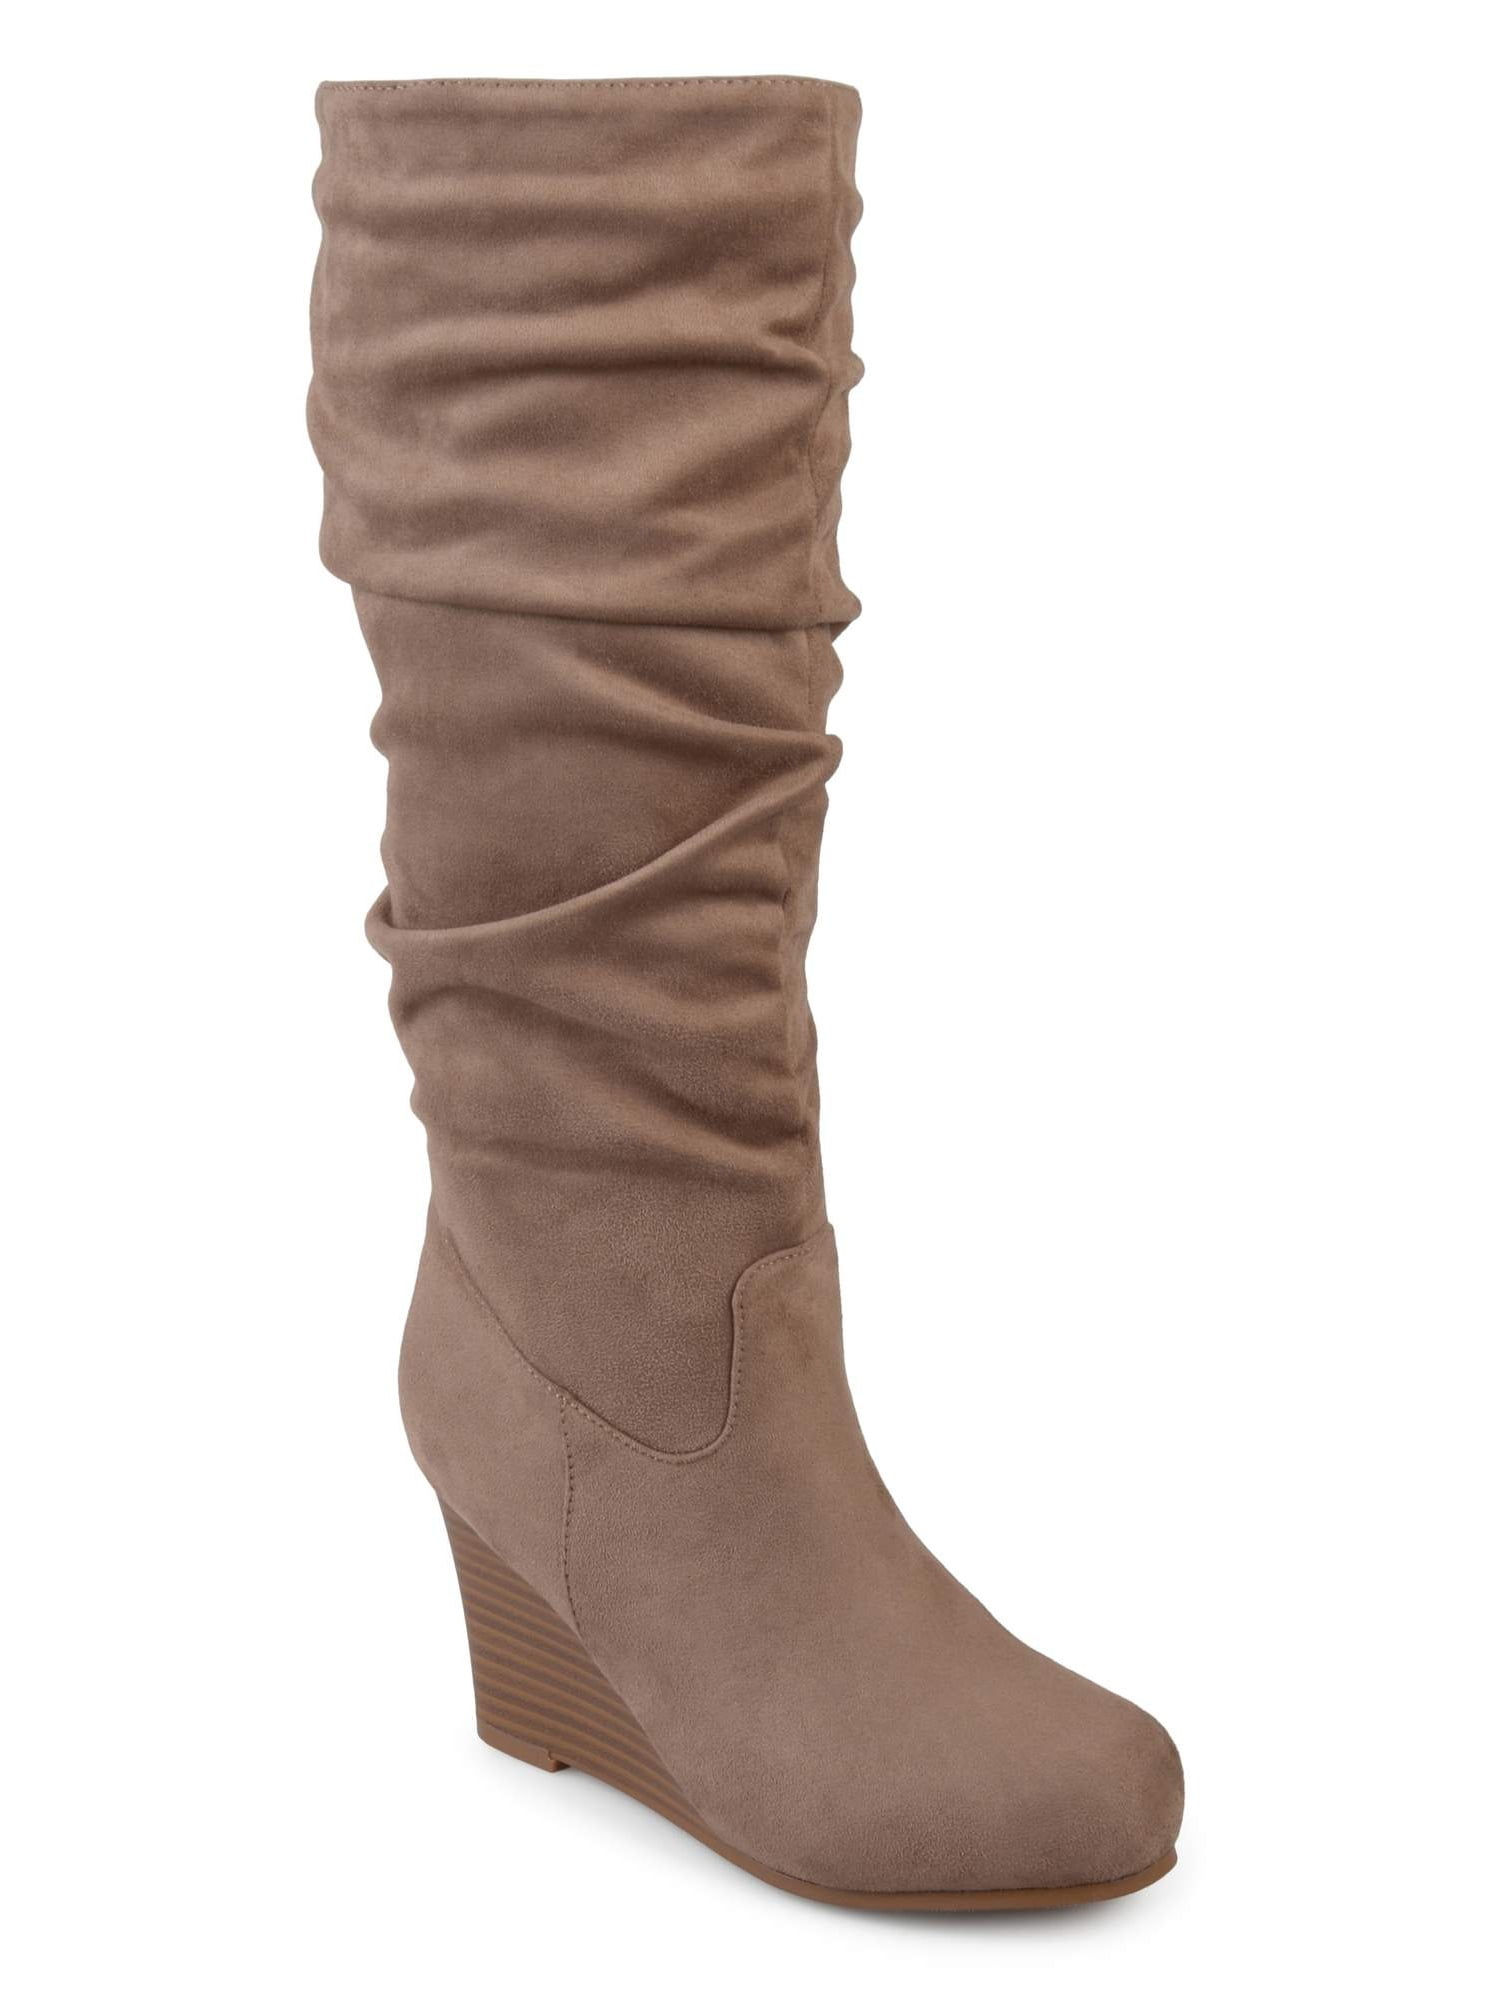 Brinley Co. - Women's Wide Calf Slouchy Faux Suede Mid-calf Wedge Boots ...